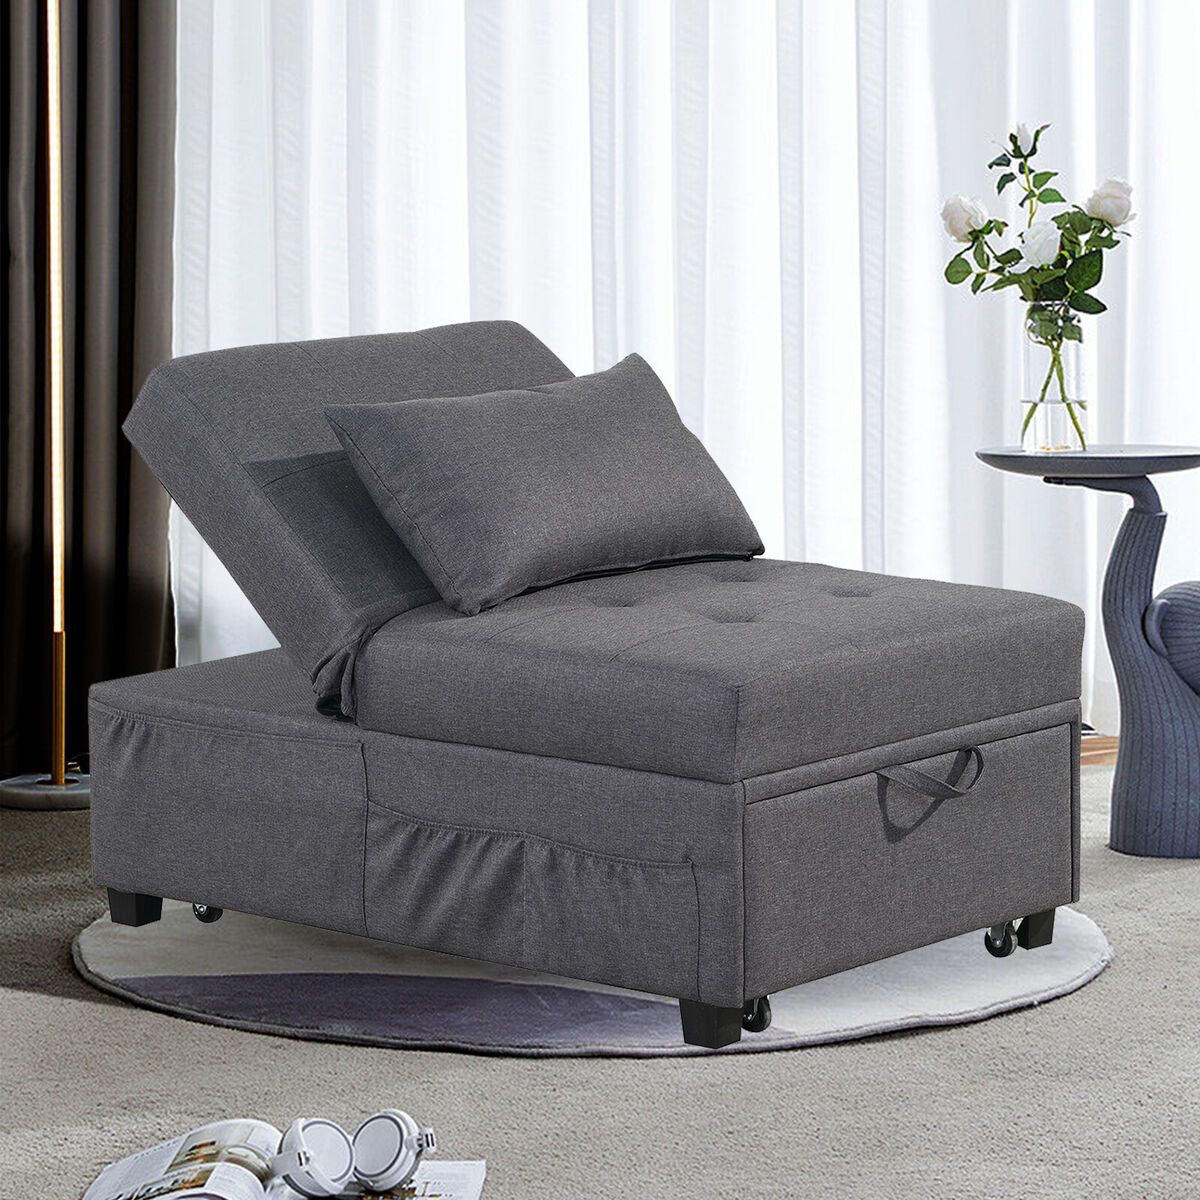 4 In 1 Convertible Sofa Bed Folding Sleeper Chair Leisure Recliner Lounge  Couch | Ebay Intended For 4 In 1 Convertible Sleeper Chair Beds (Photo 14 of 15)